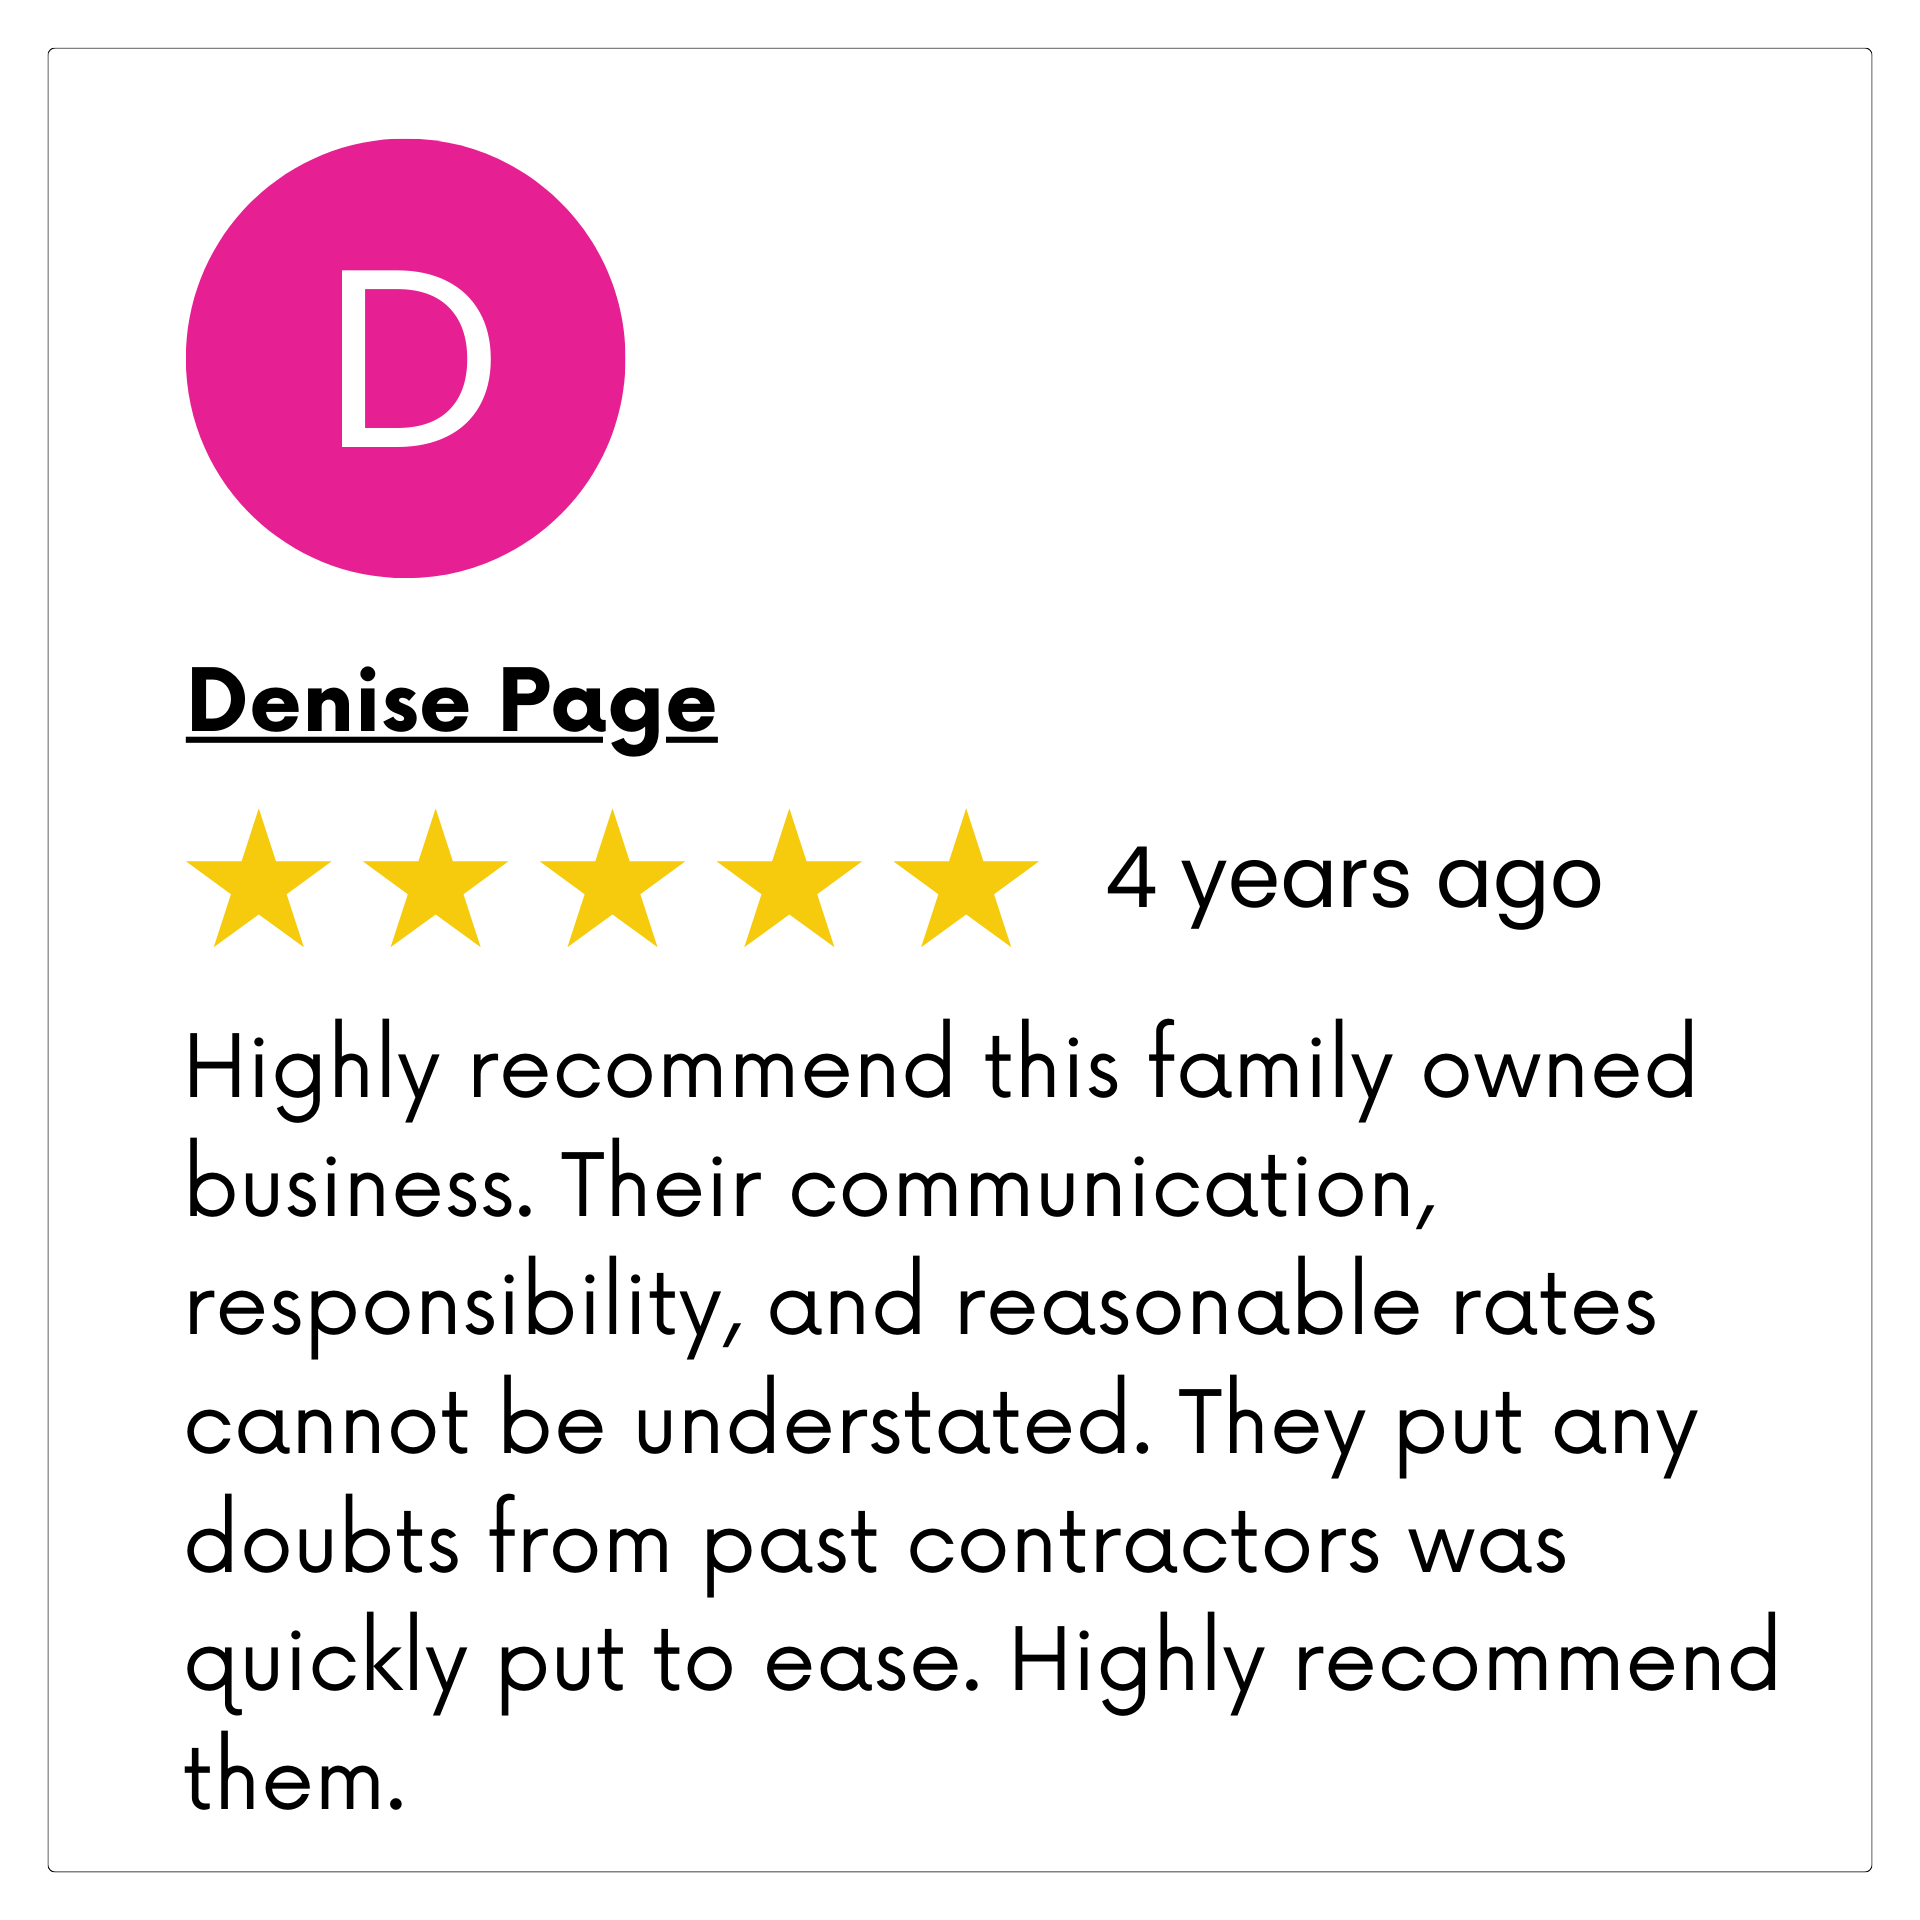 A review of a family owned business from denise page.